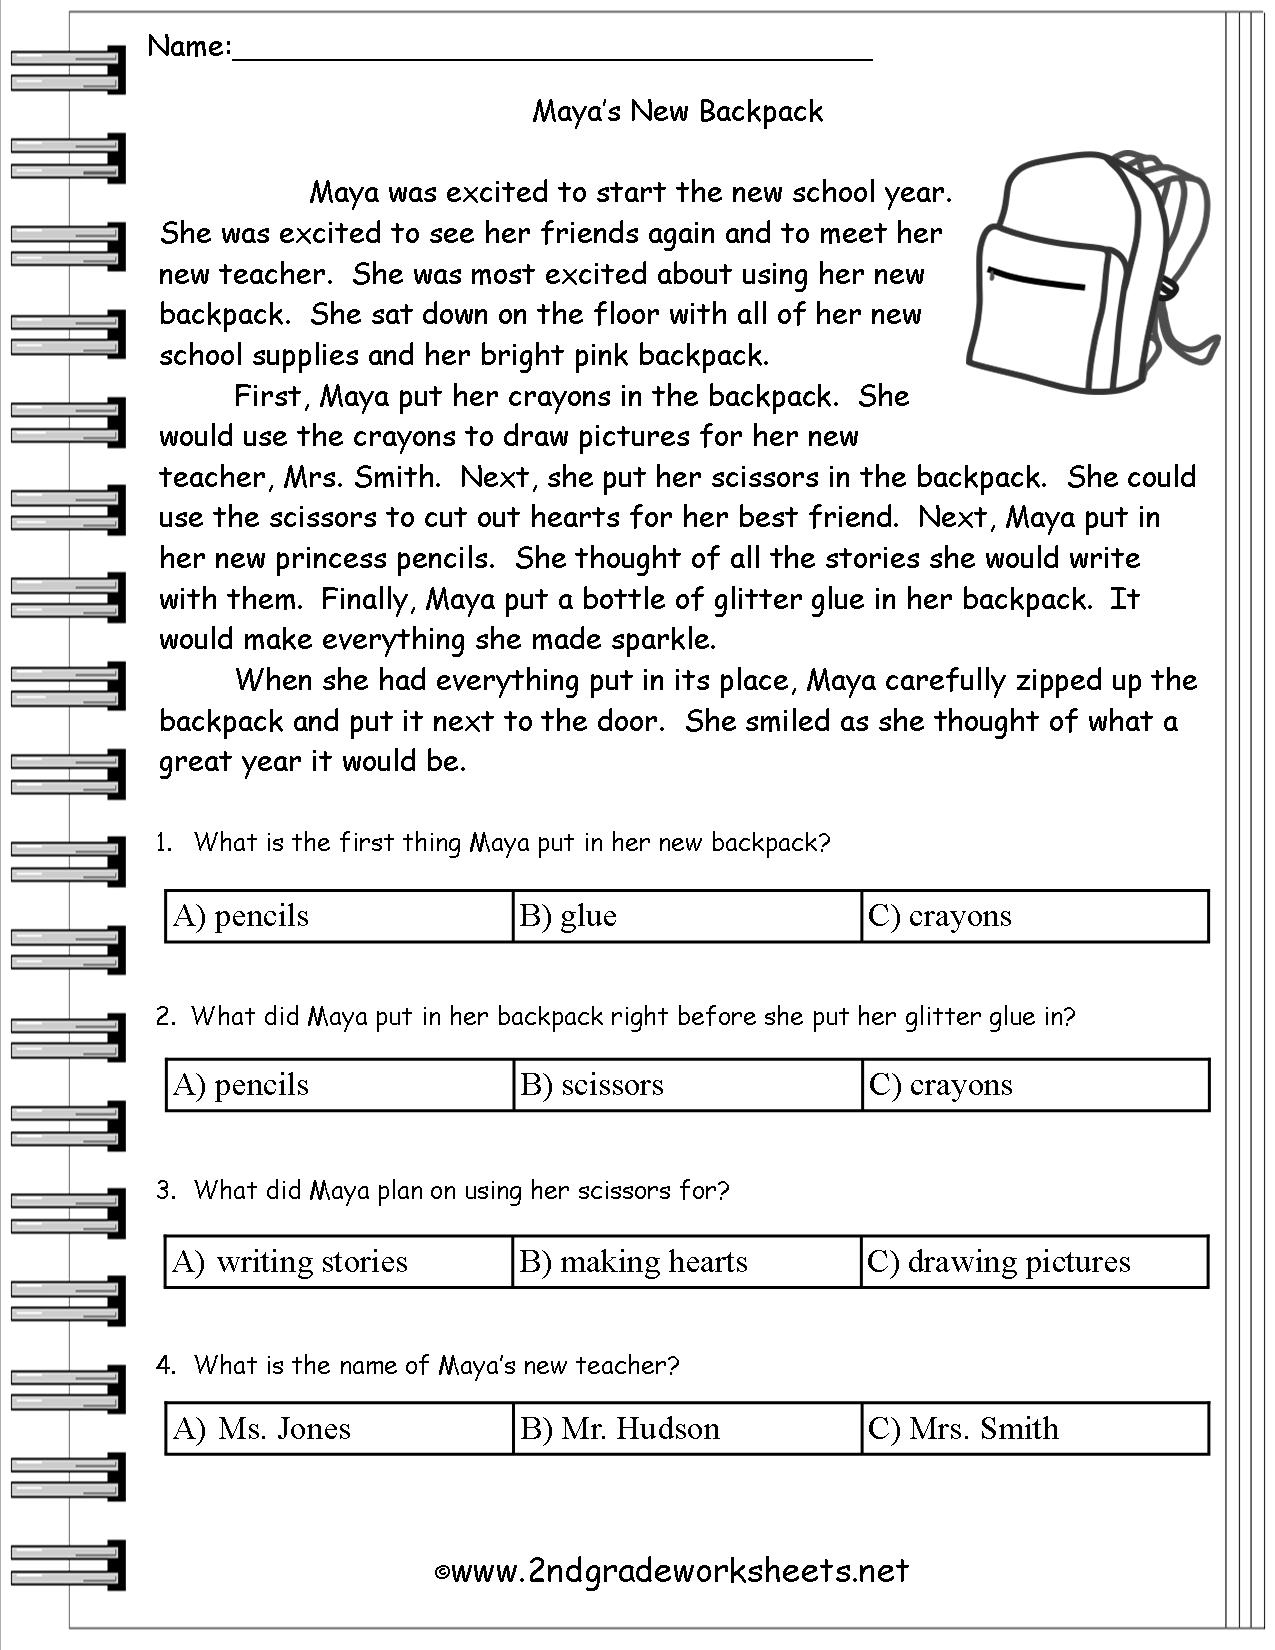 Free Back To School Worksheets And Printouts | Free Printable Middle School Reading Comprehension Worksheets